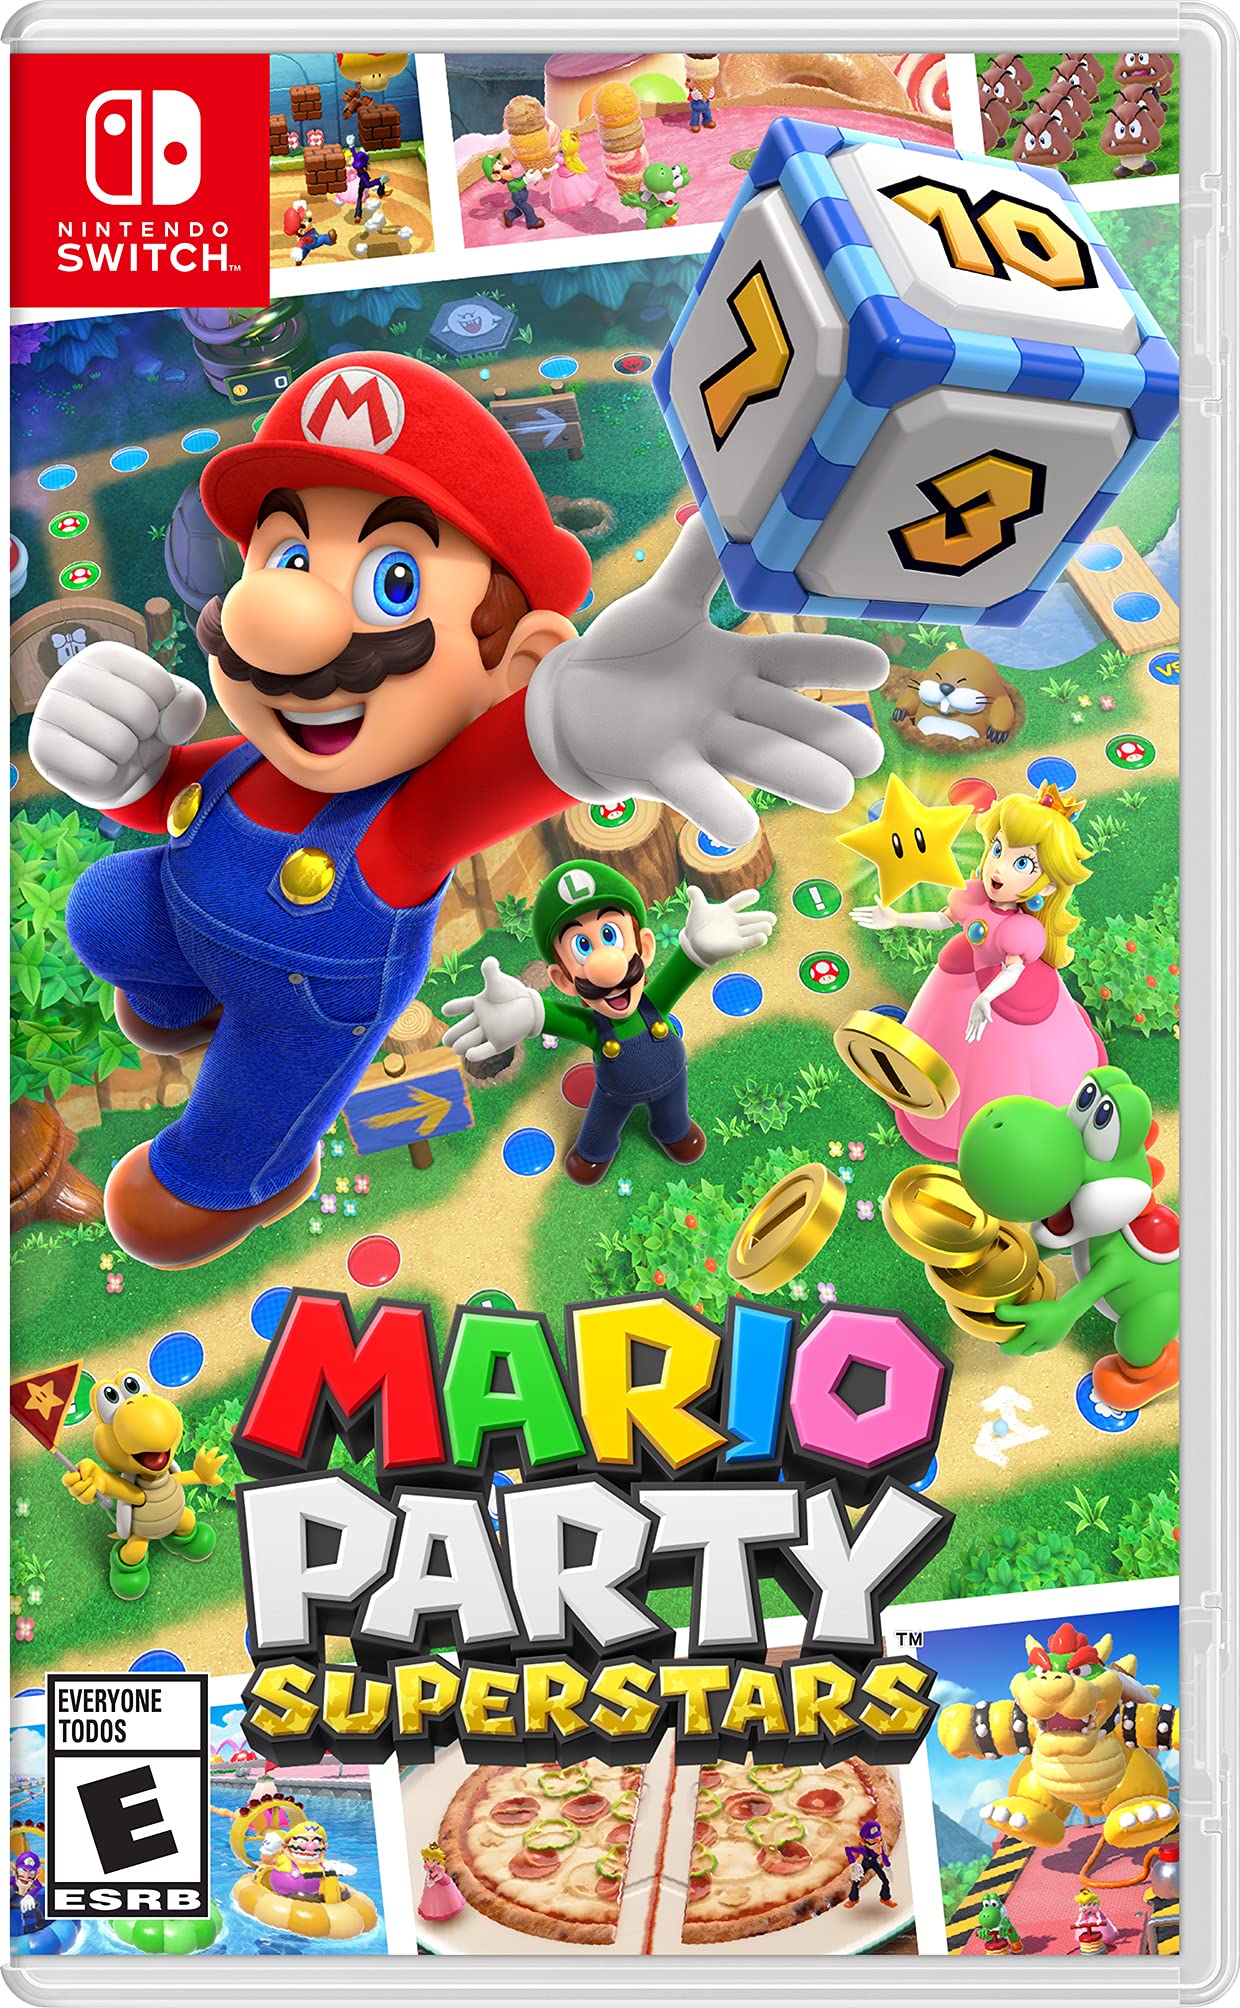 Super Mario Party Nintendo Switch Character Dice : r/SuperMarioParty